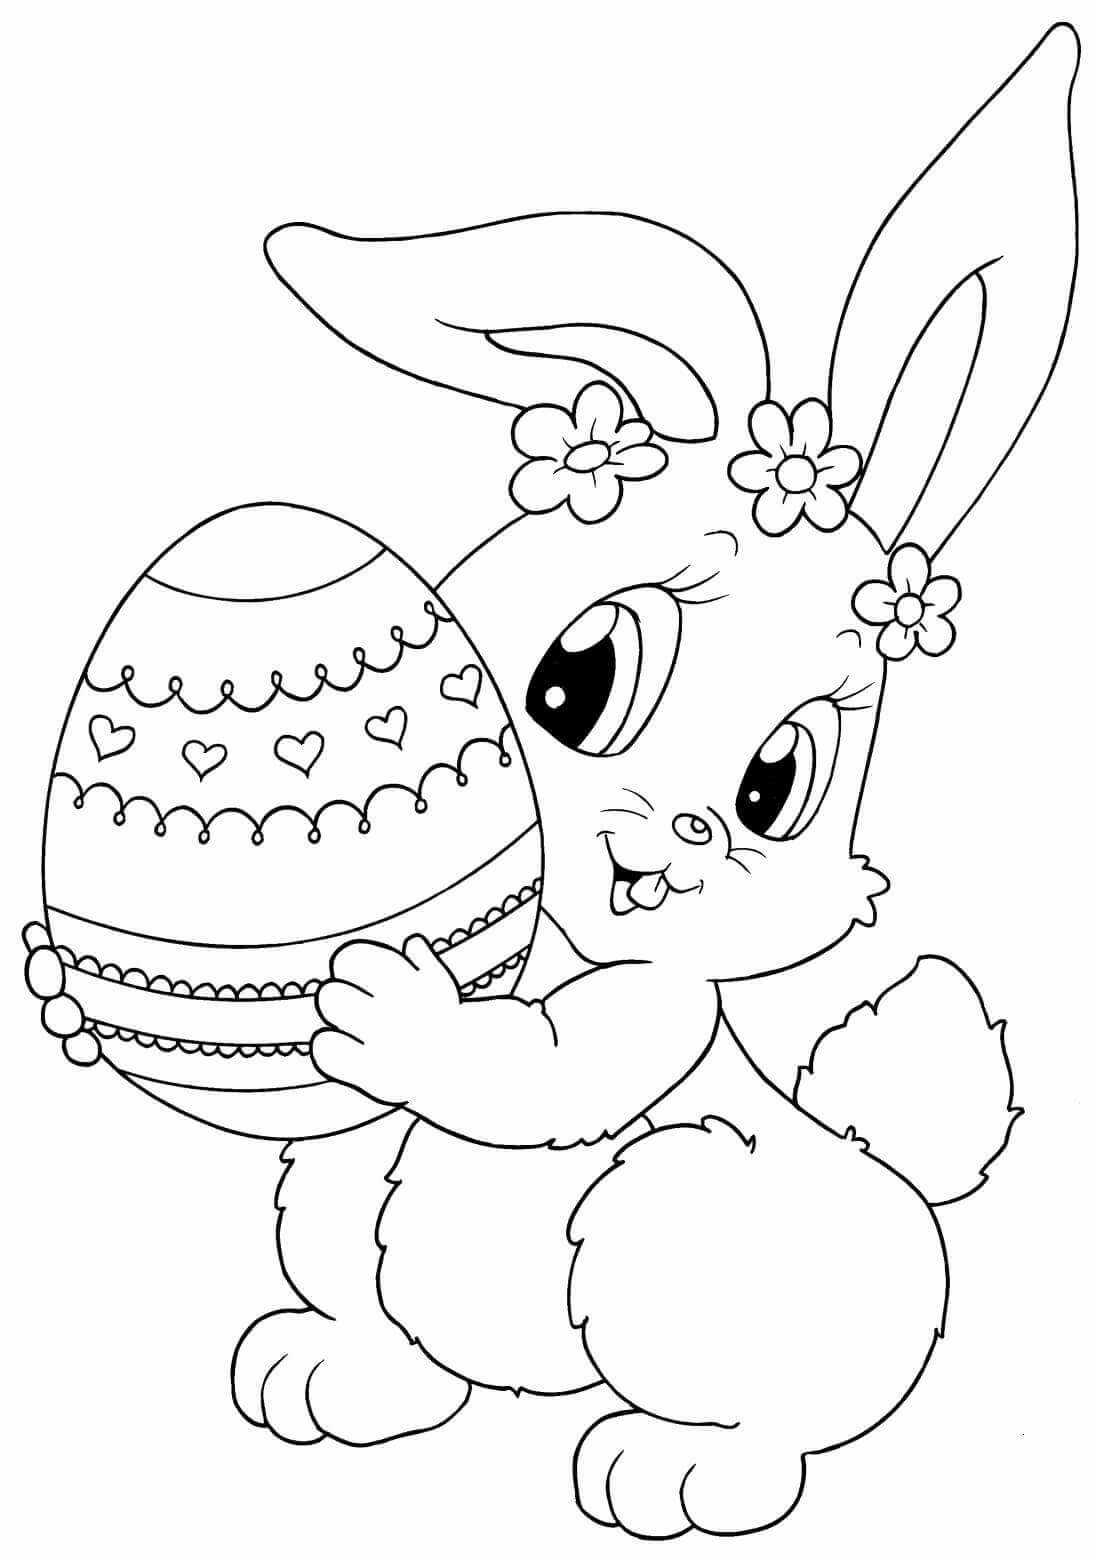 Bunny Holding An Easter Egg Coloring Page